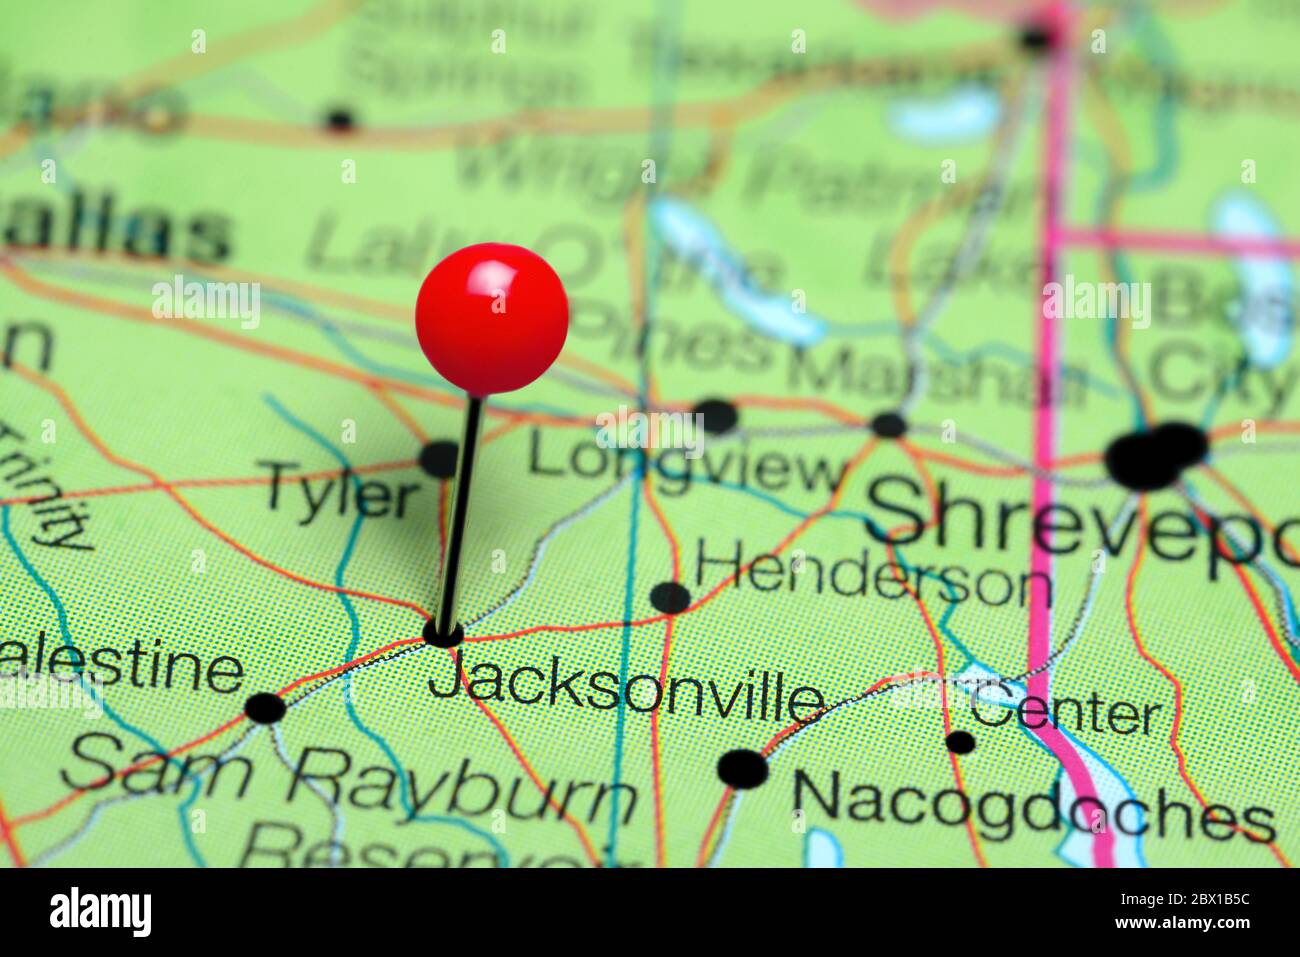 Jacksonville pinned on a map of Texas, USA Stock Photo